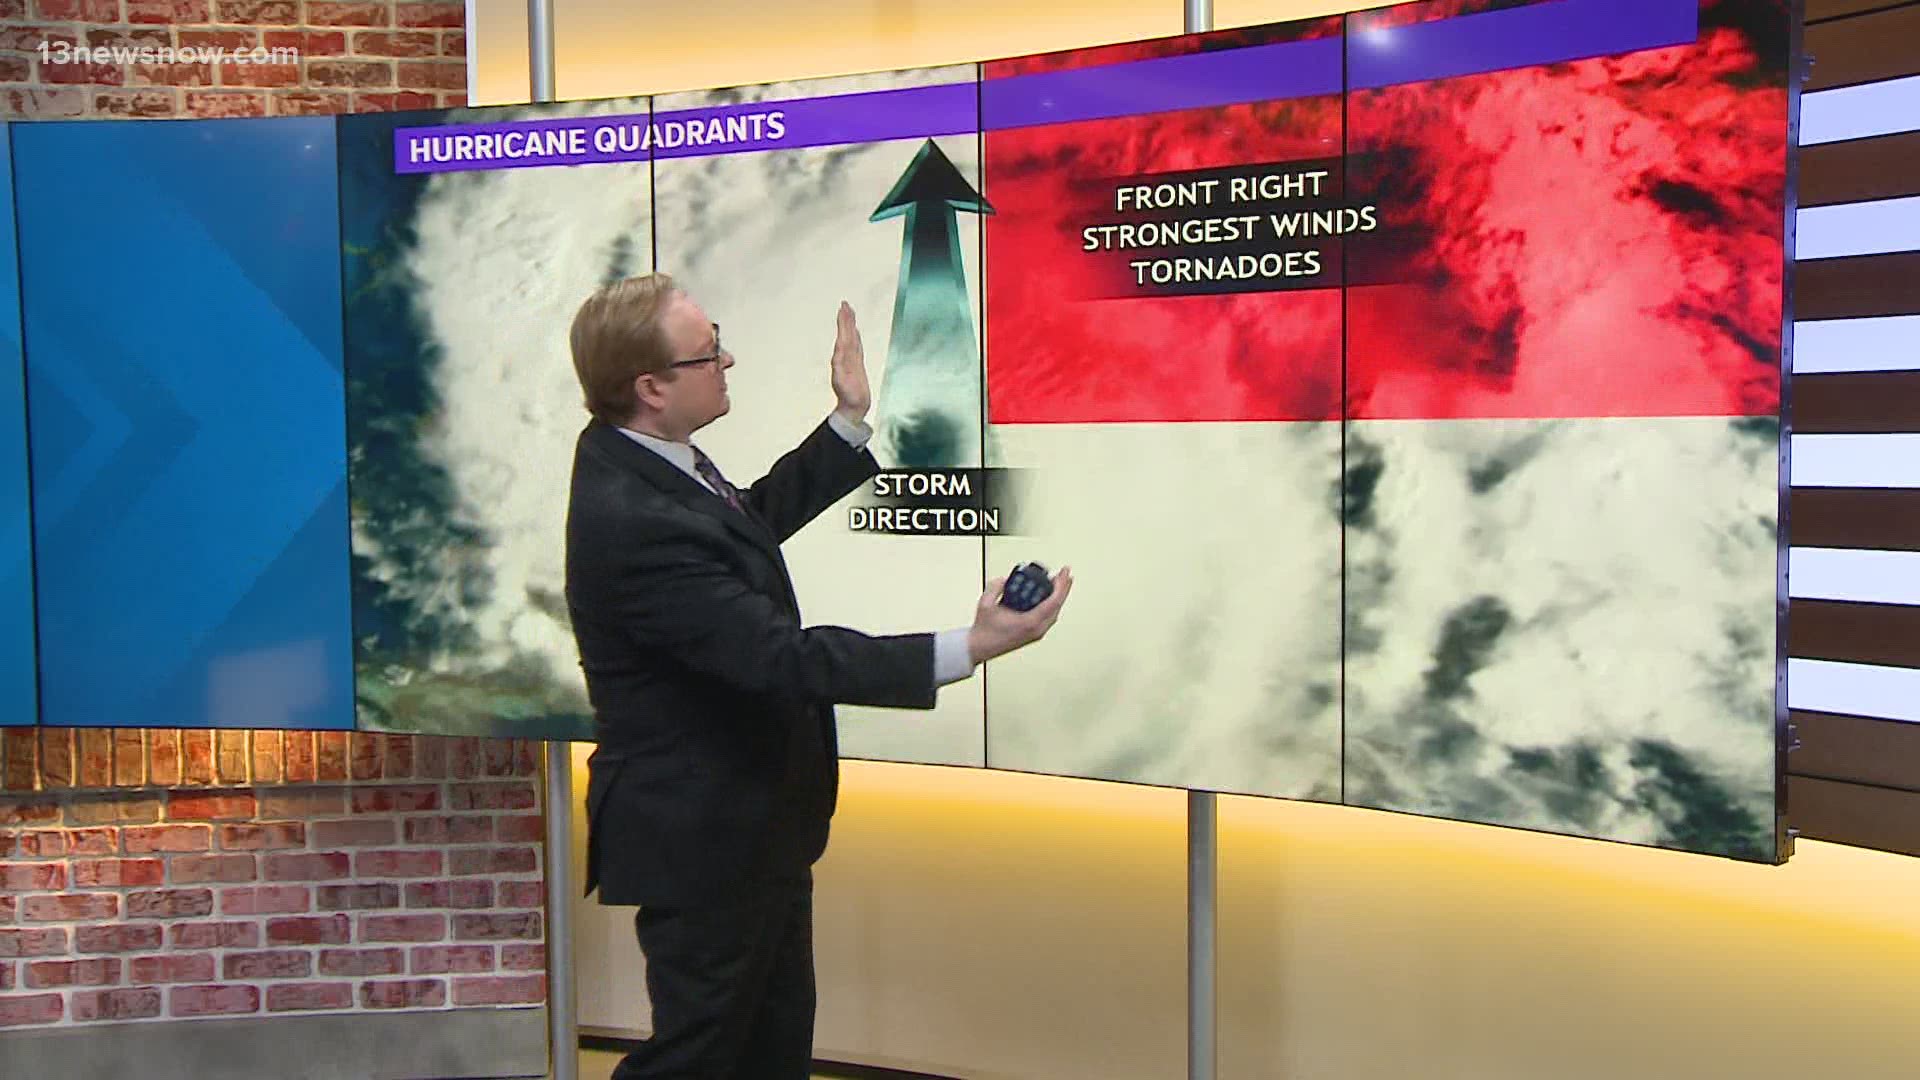 13News Now meteorologist Evan Stewart explains the conditions in Bertie County, North Carolina that led to Tuesday morning's deadly tornado.